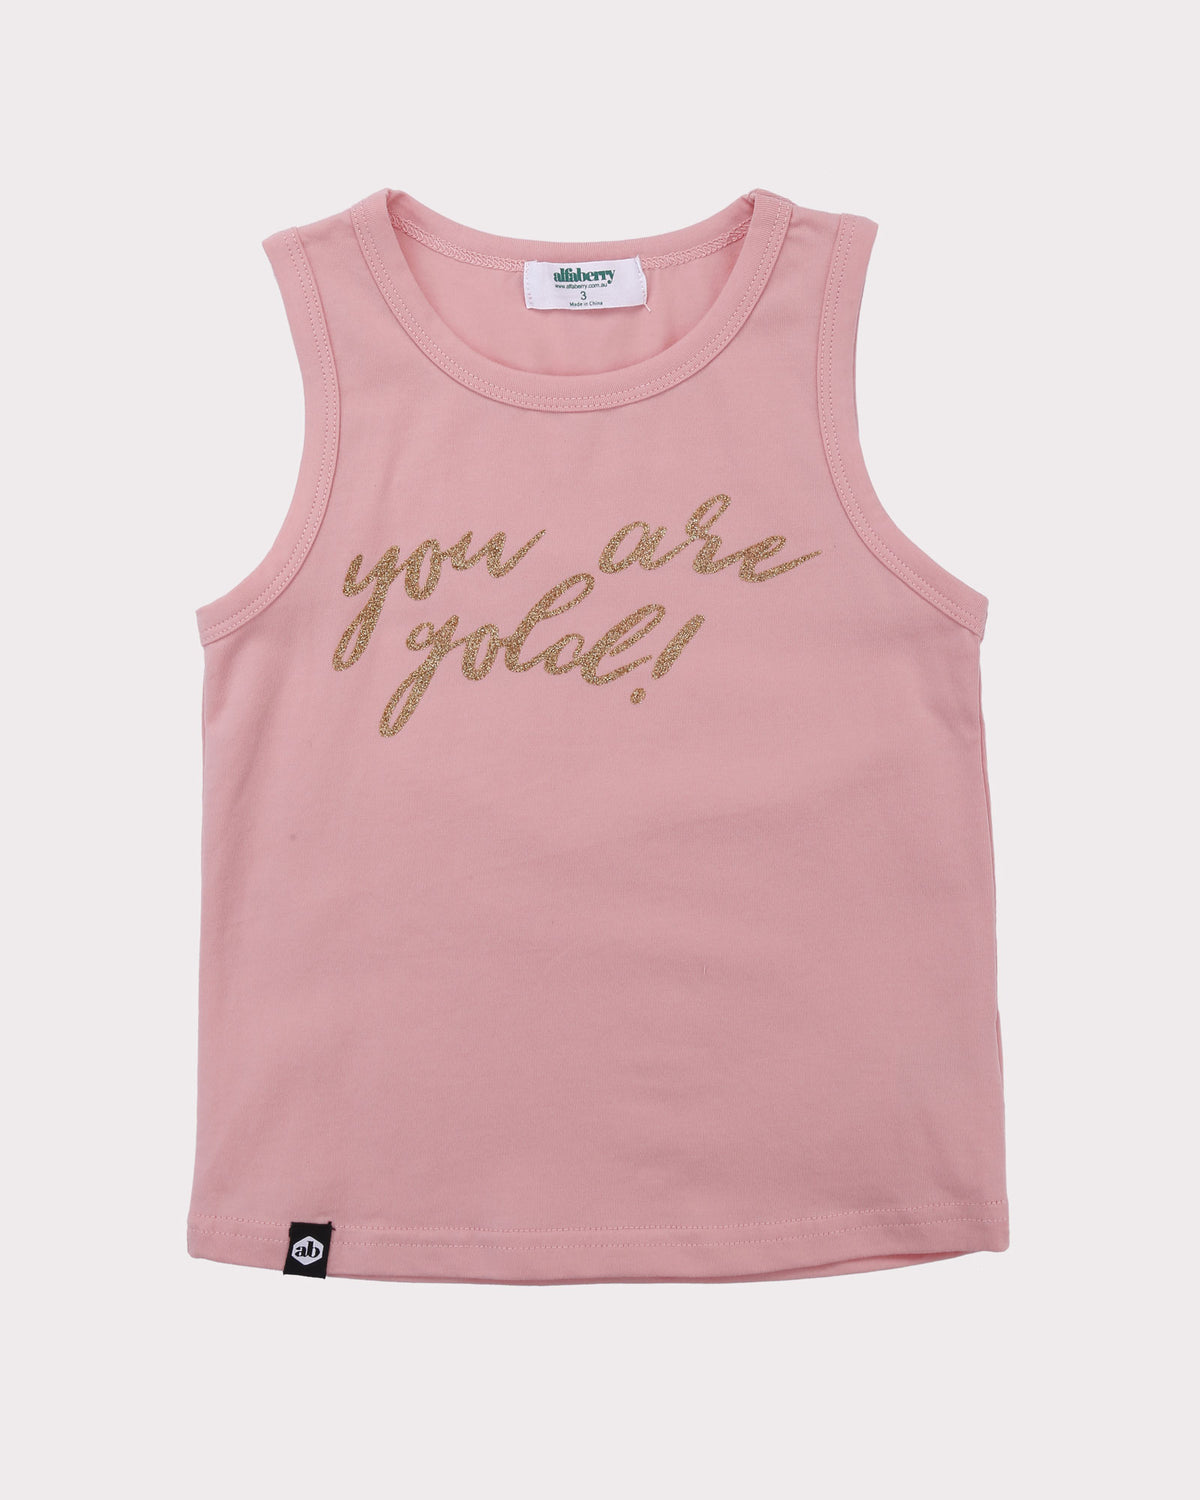 Your Are Gold Tee in Pink front